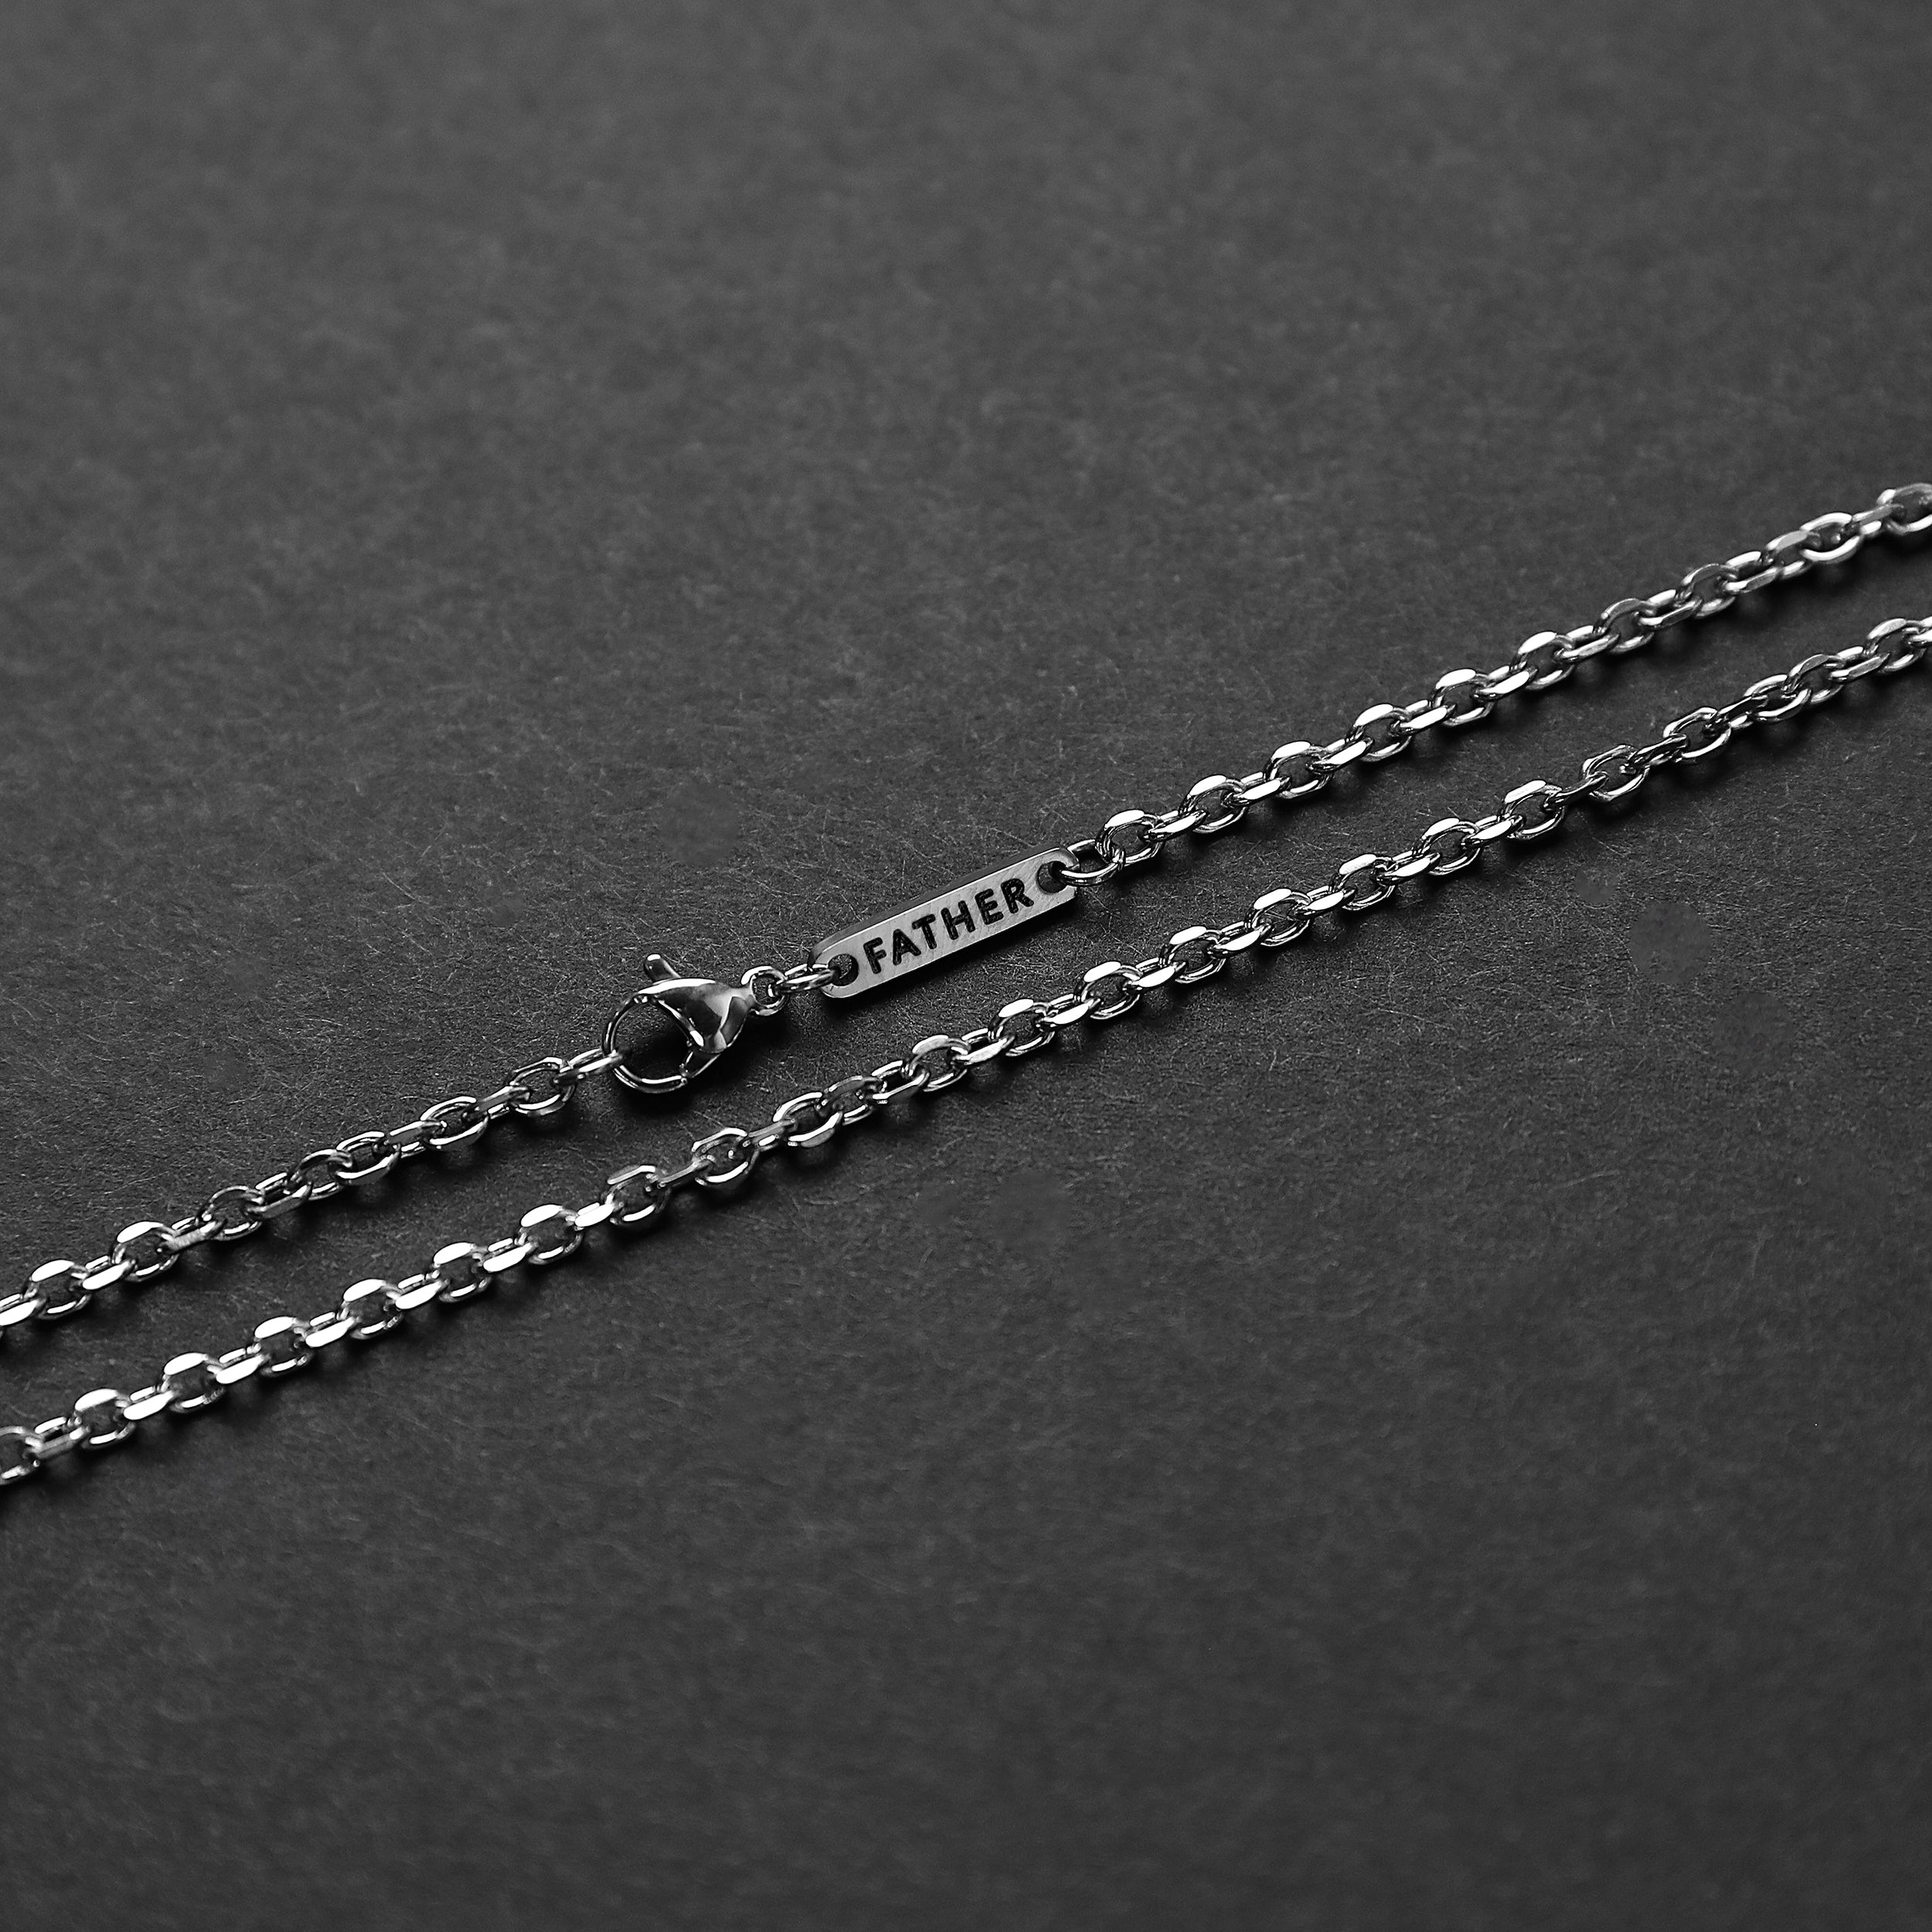 Personalized Cable Chain - Silver 3mm